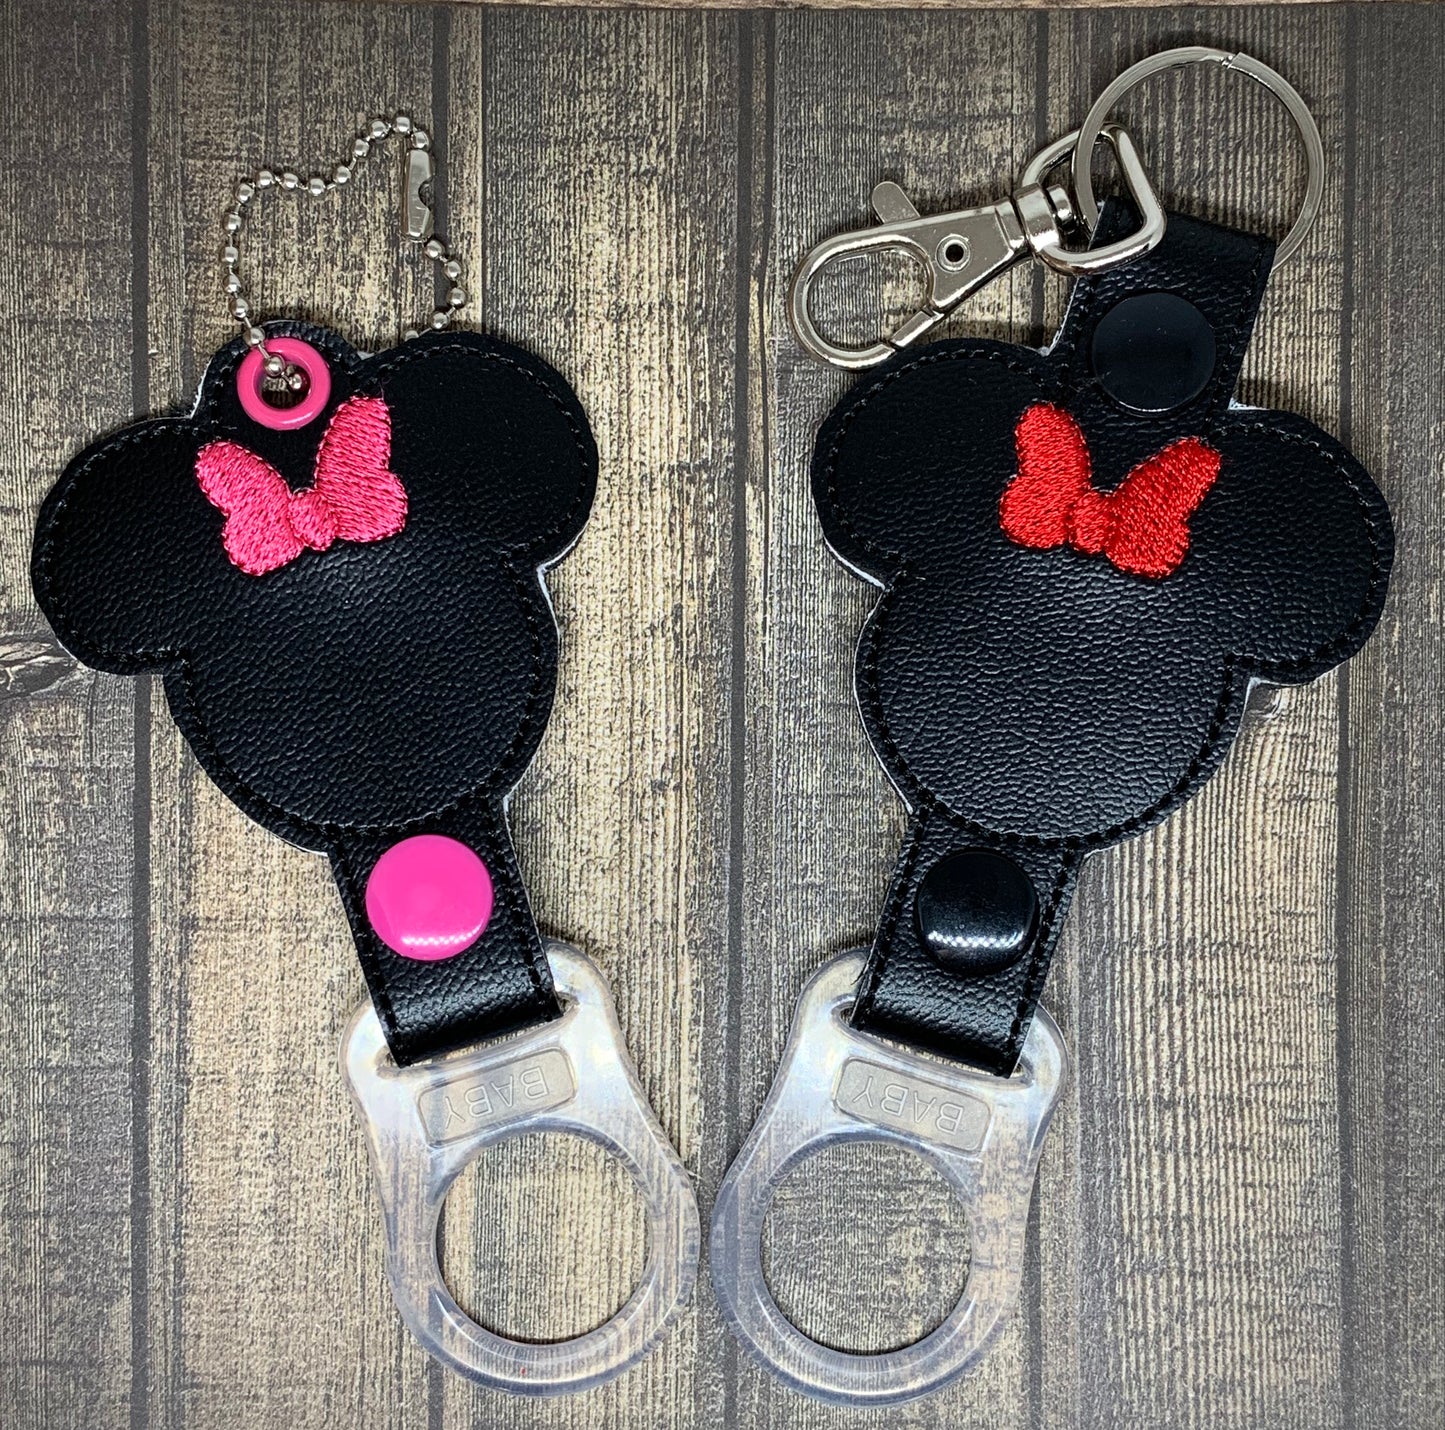 Miss Mouse Water Bottle Holders - DIGITAL Embroidery DESIGN